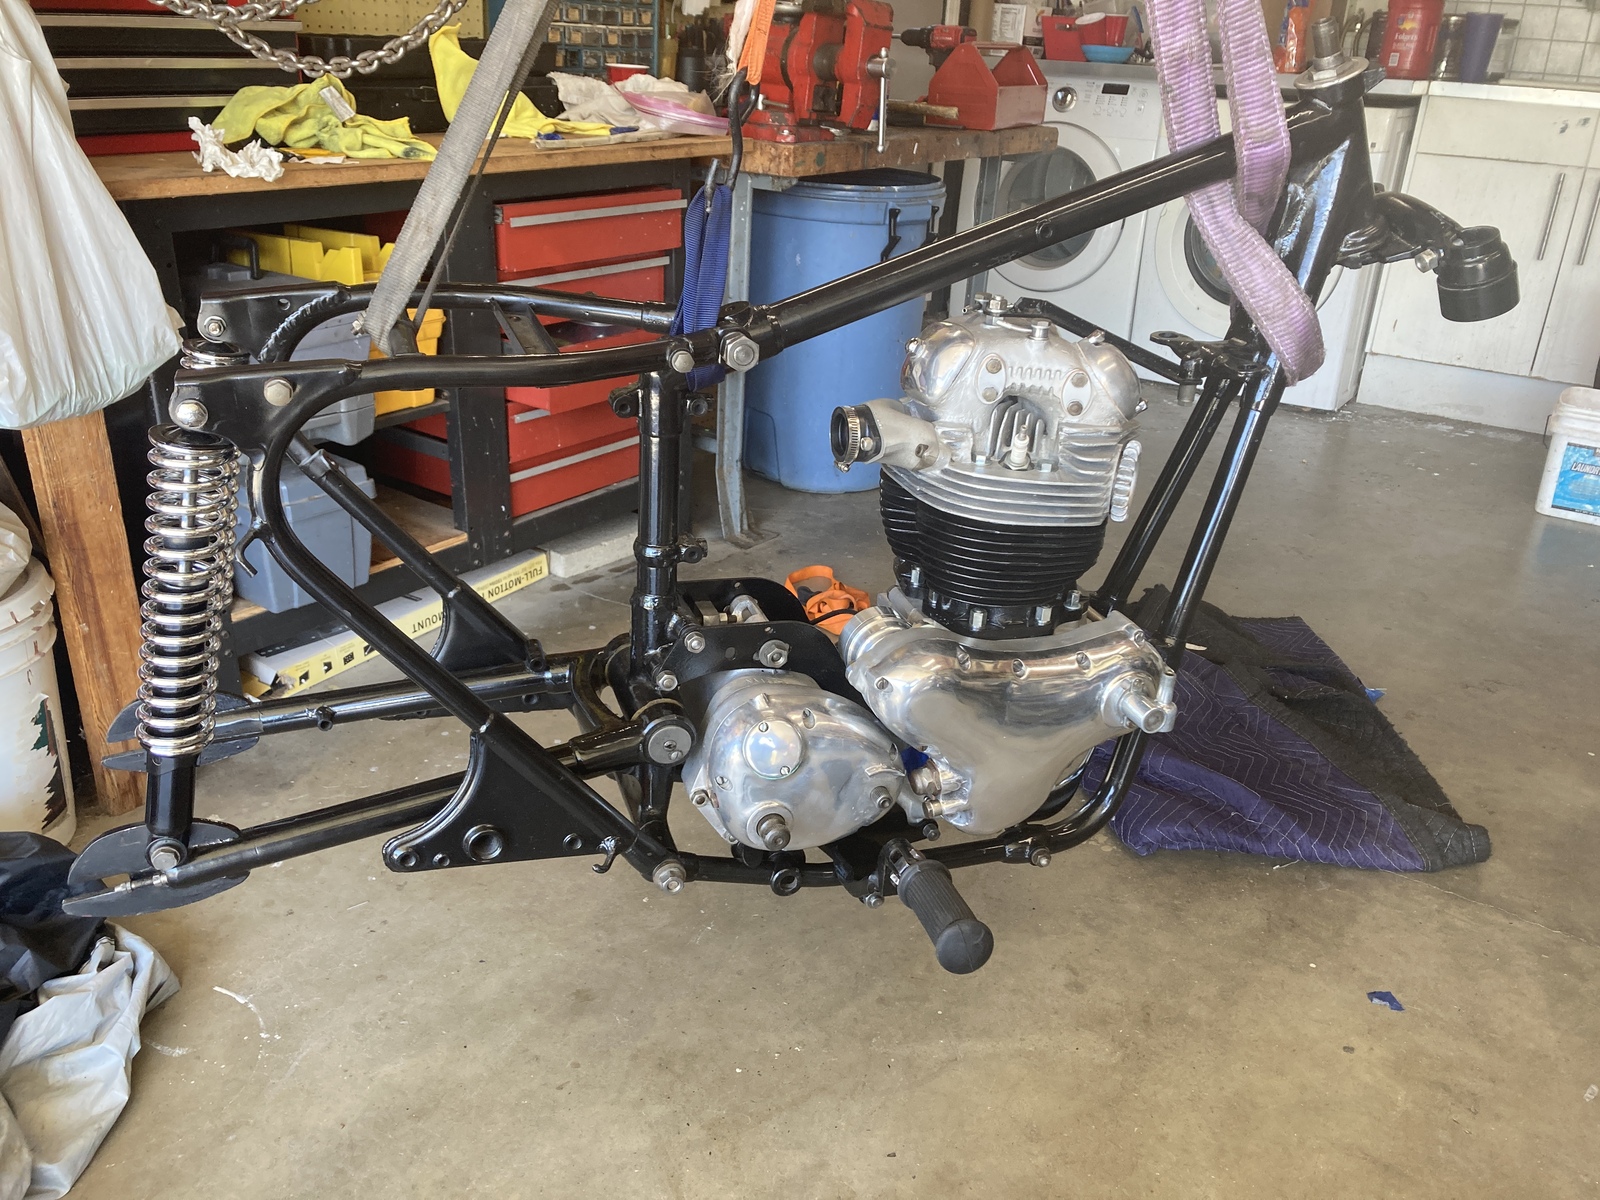 '66 N15 coming together